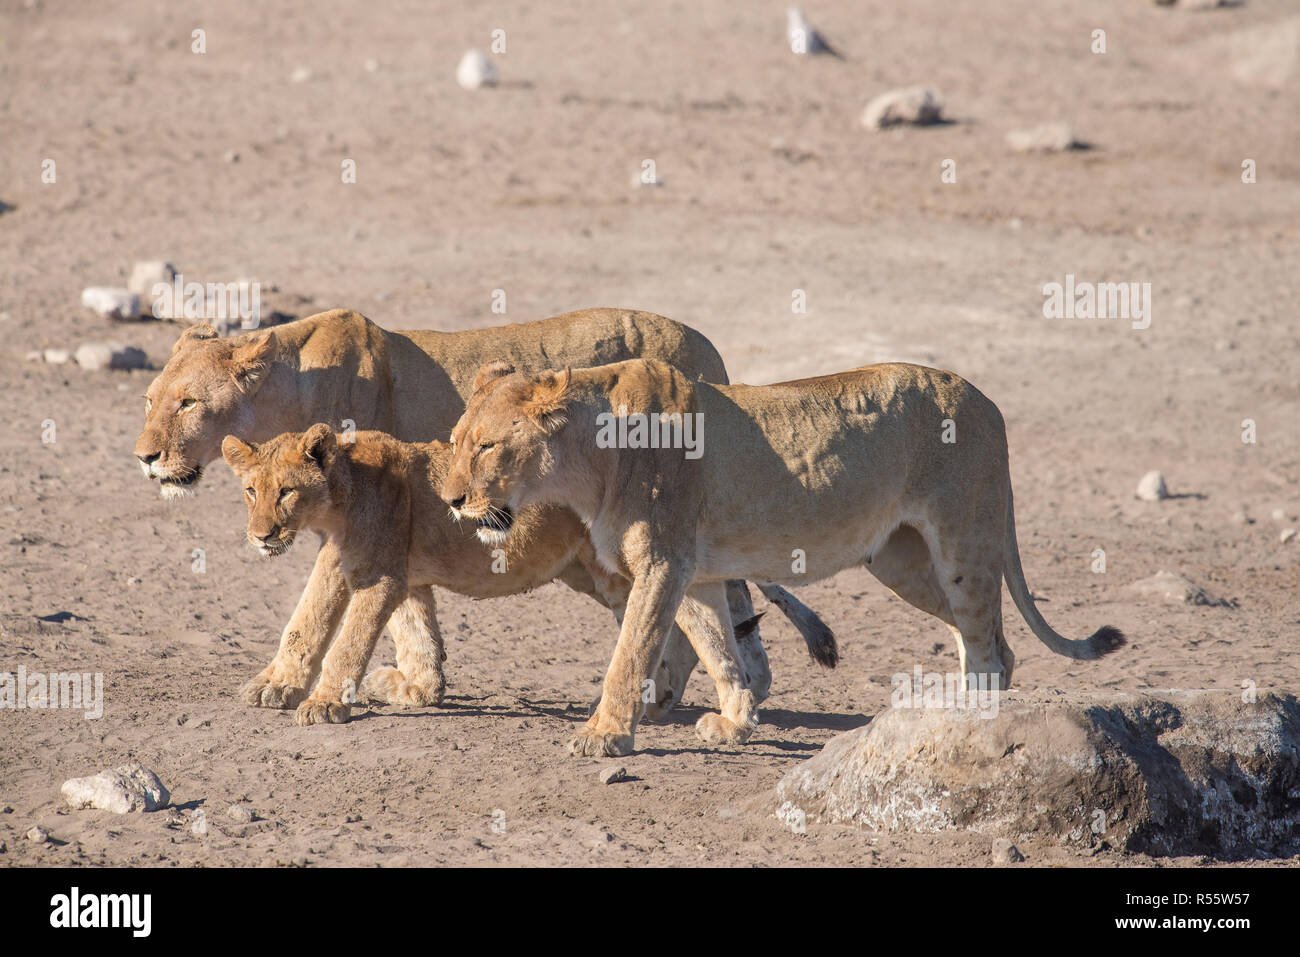 Female lions walking together Stock Photo